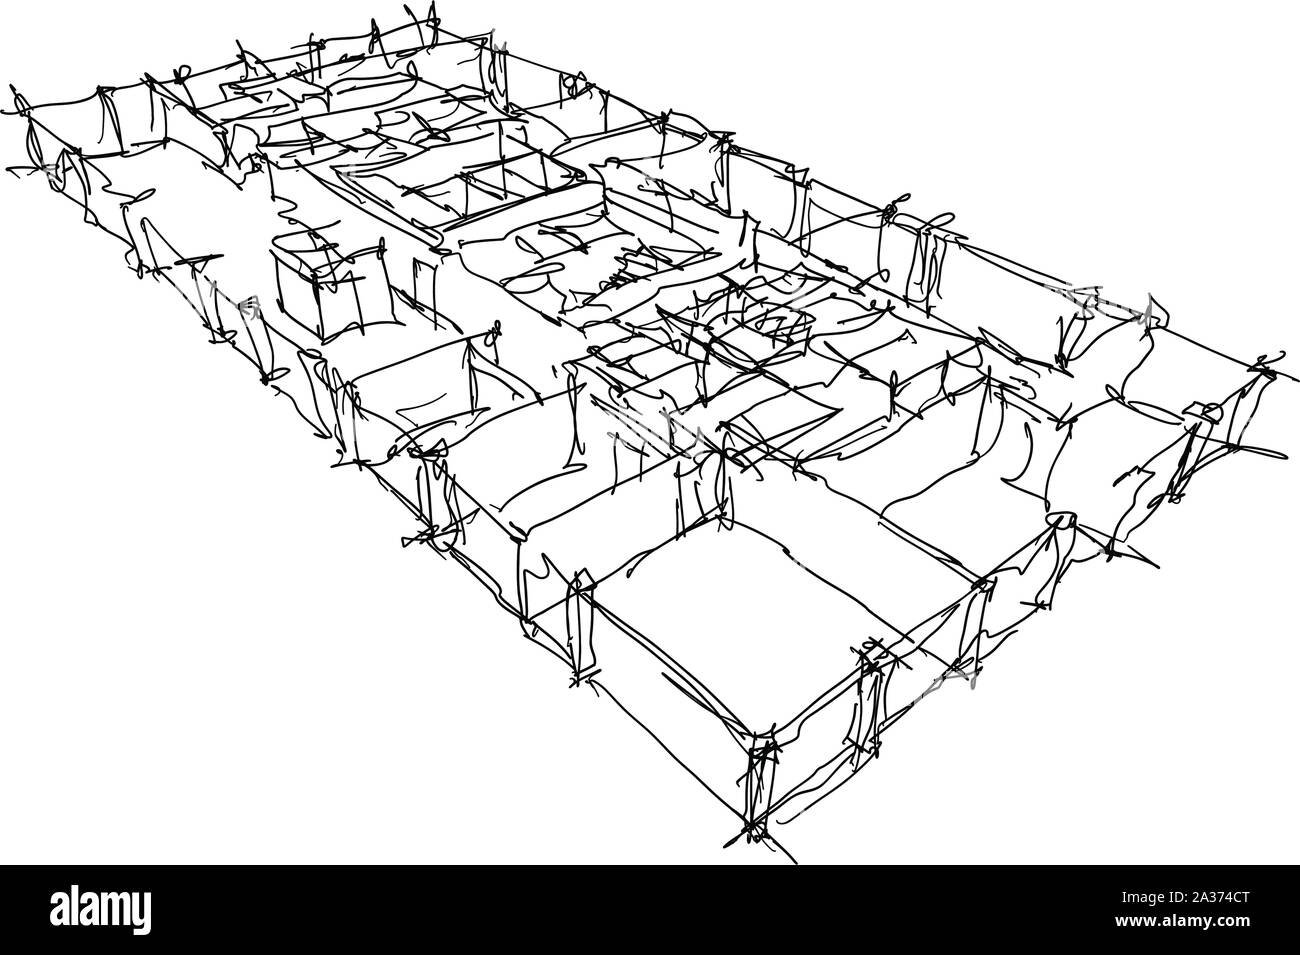 hand drawn architectural sketch of a typical floor in modern office building Stock Vector